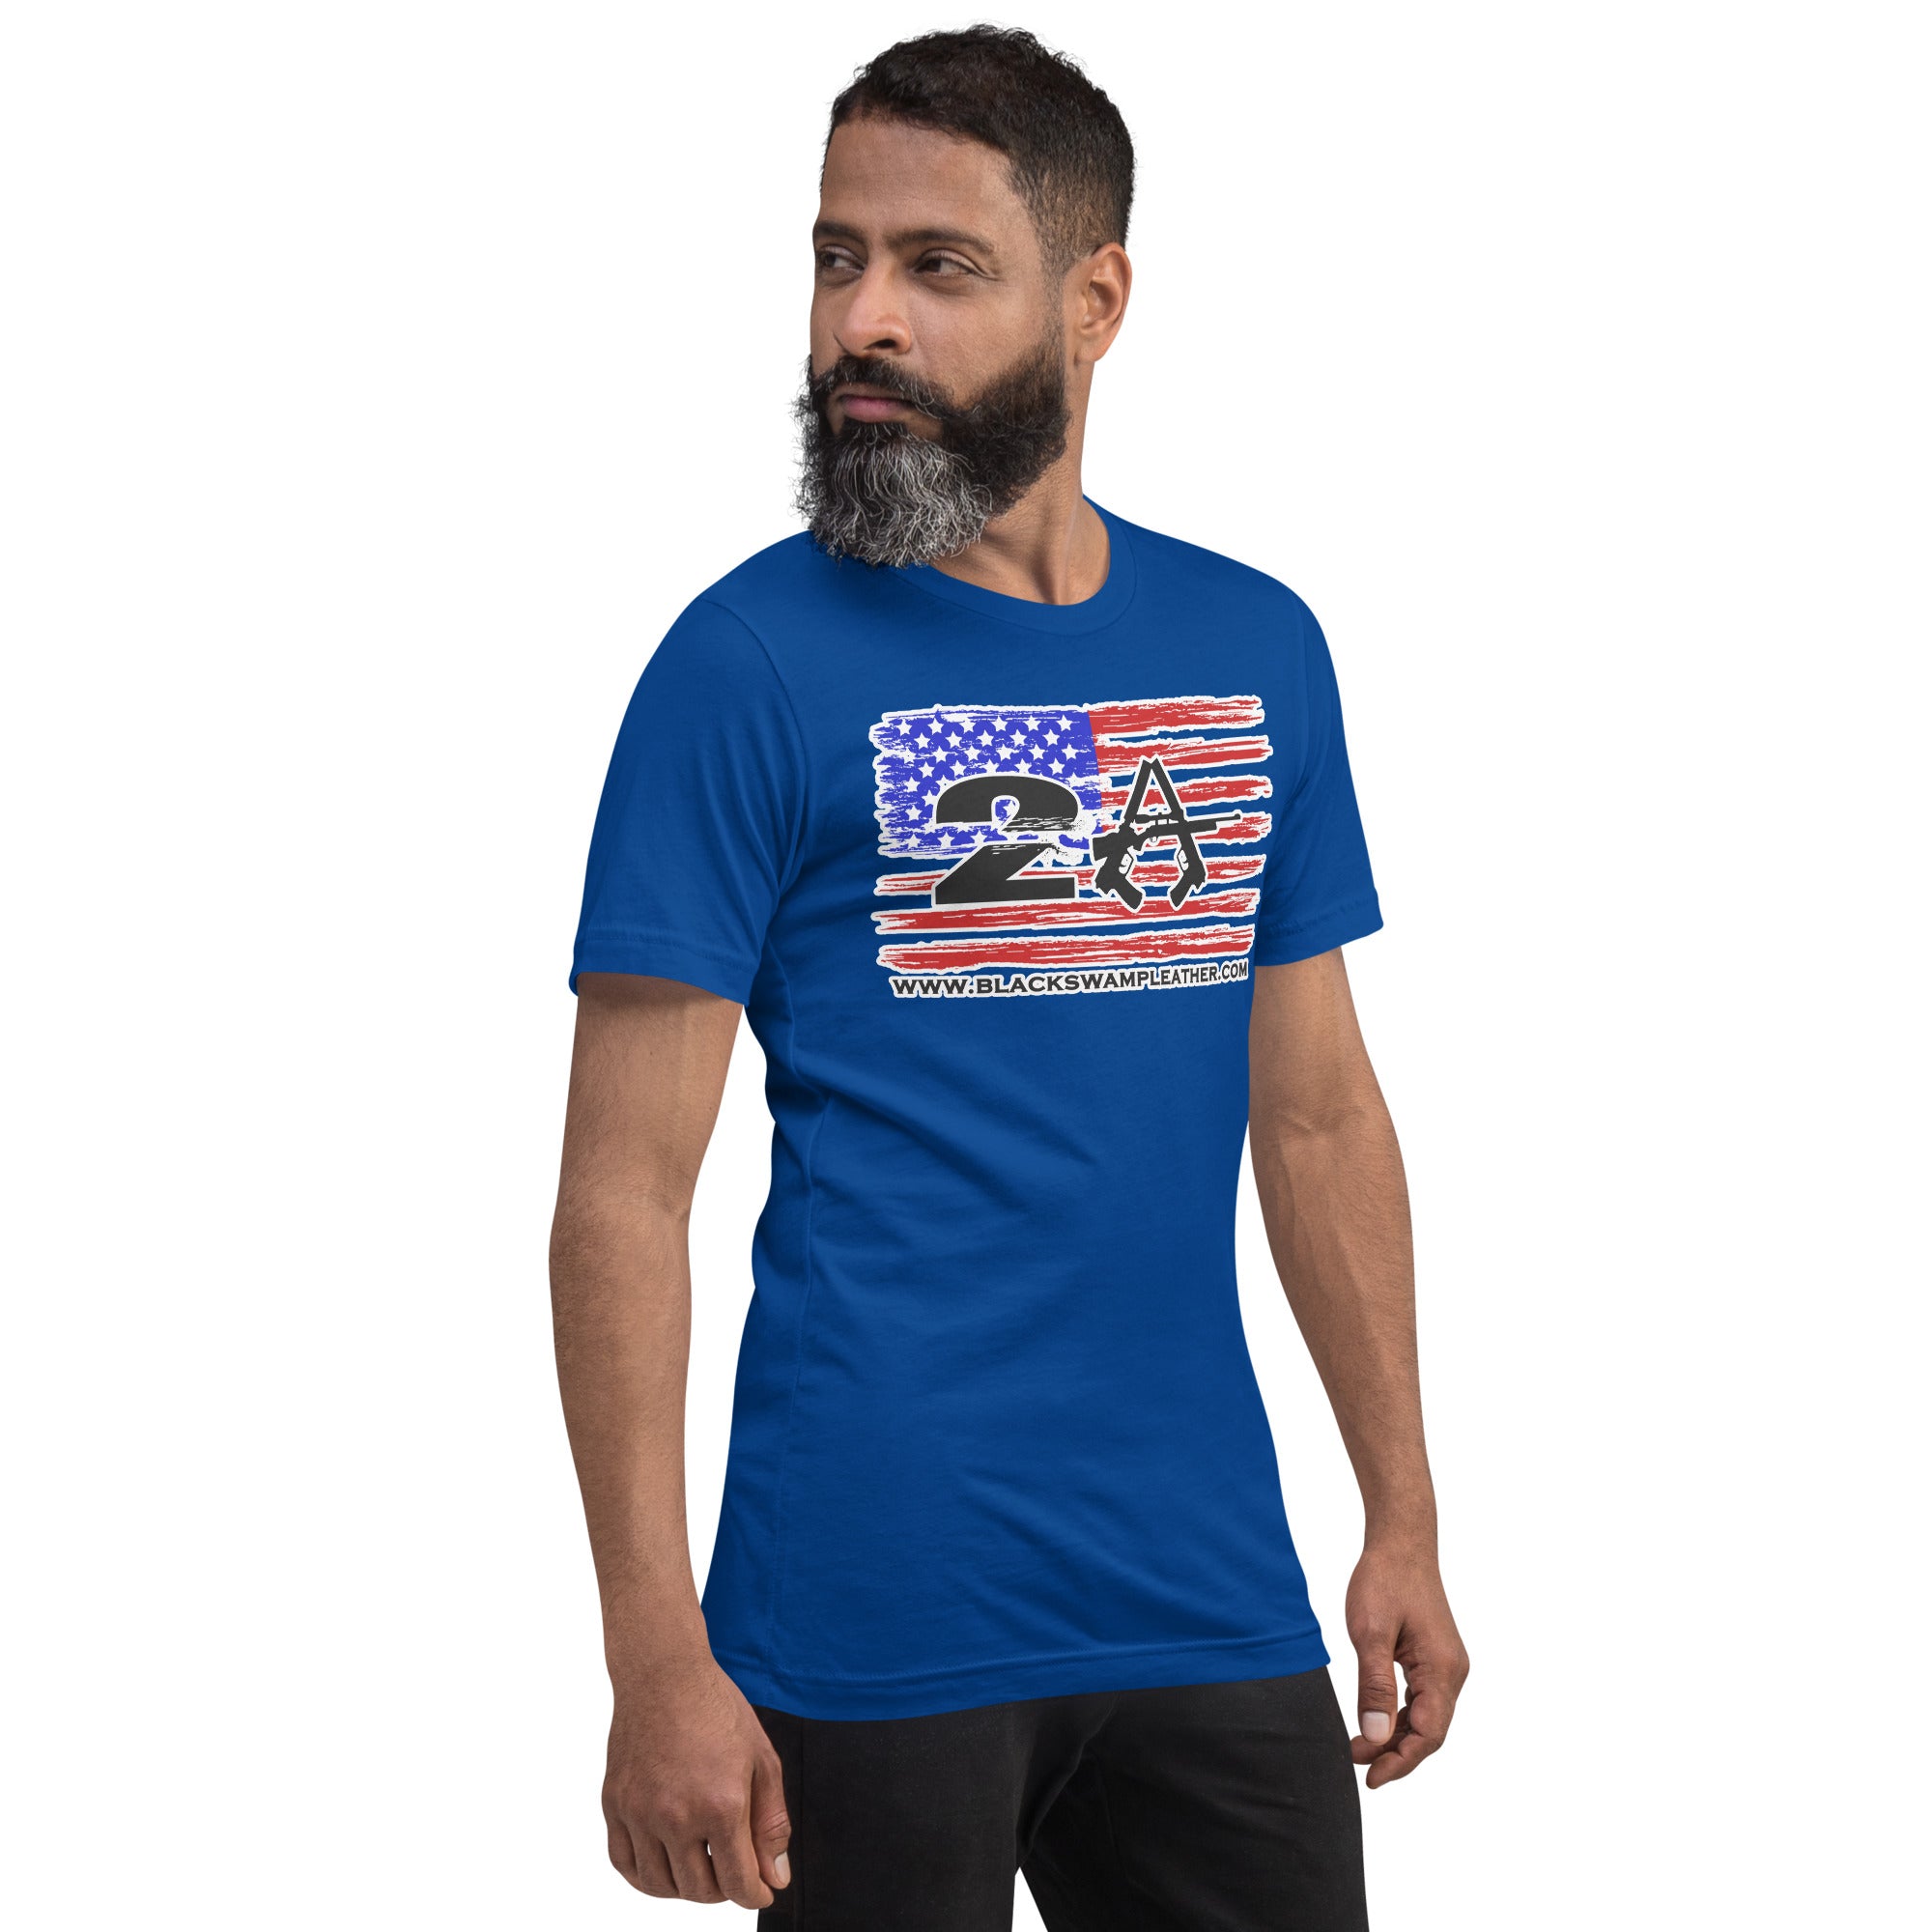 2A US Flag With Outline Unisex t-shirt